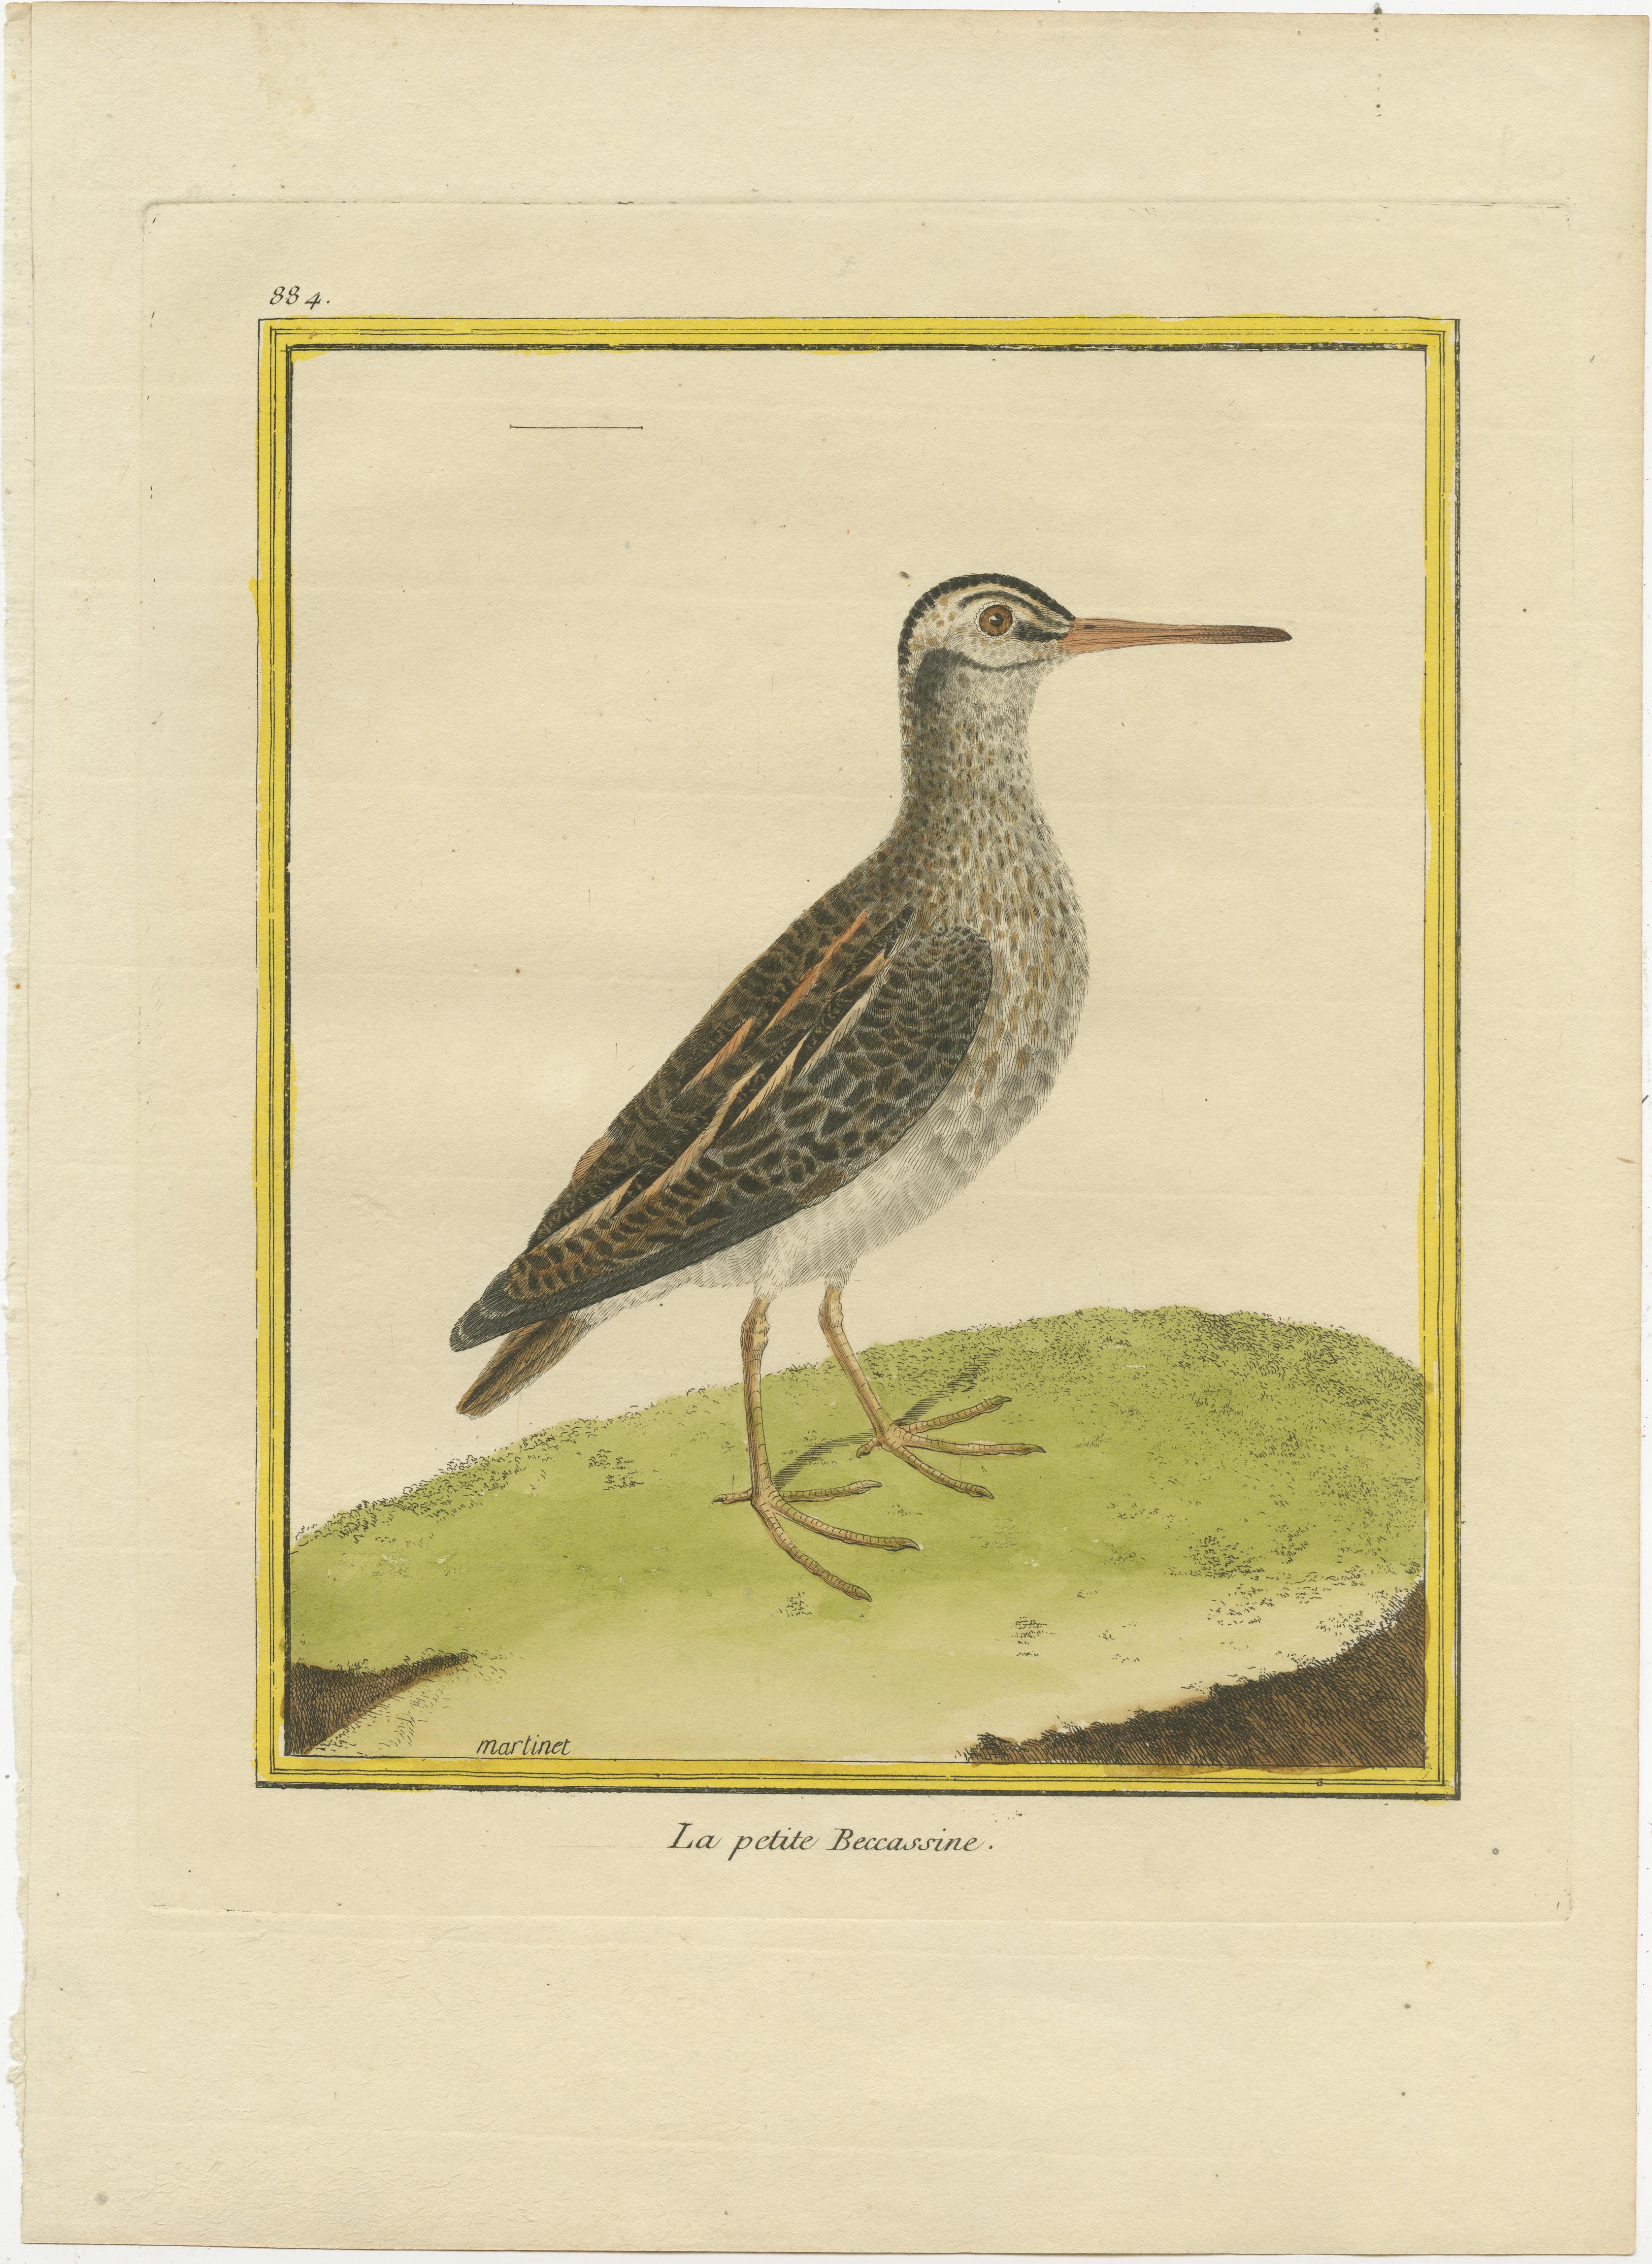 Antique print titled 'la petite Beccassine'. Hand colored engraving of a small snipe.

This print originates from 'Histoire Naturelle des Oiseaux' by Francois Nicolas Martinet, one of France’s foremost bird illustrators of the 18th century.